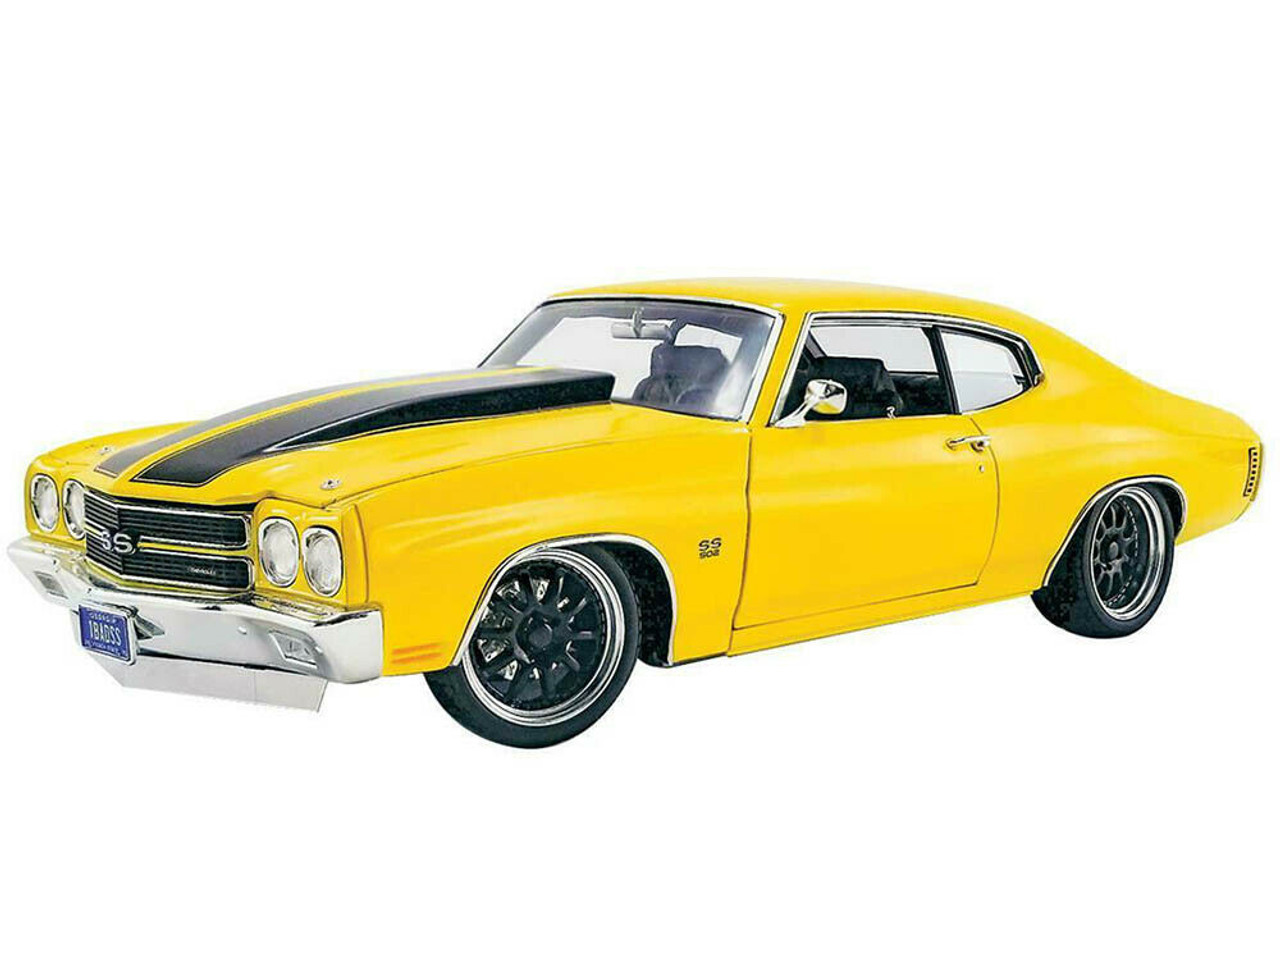 1/18 ACME 1970 Chevrolet Chevy Chevelle Street Fighter (Daytona Yellow) Diecast Car Model Limited 522